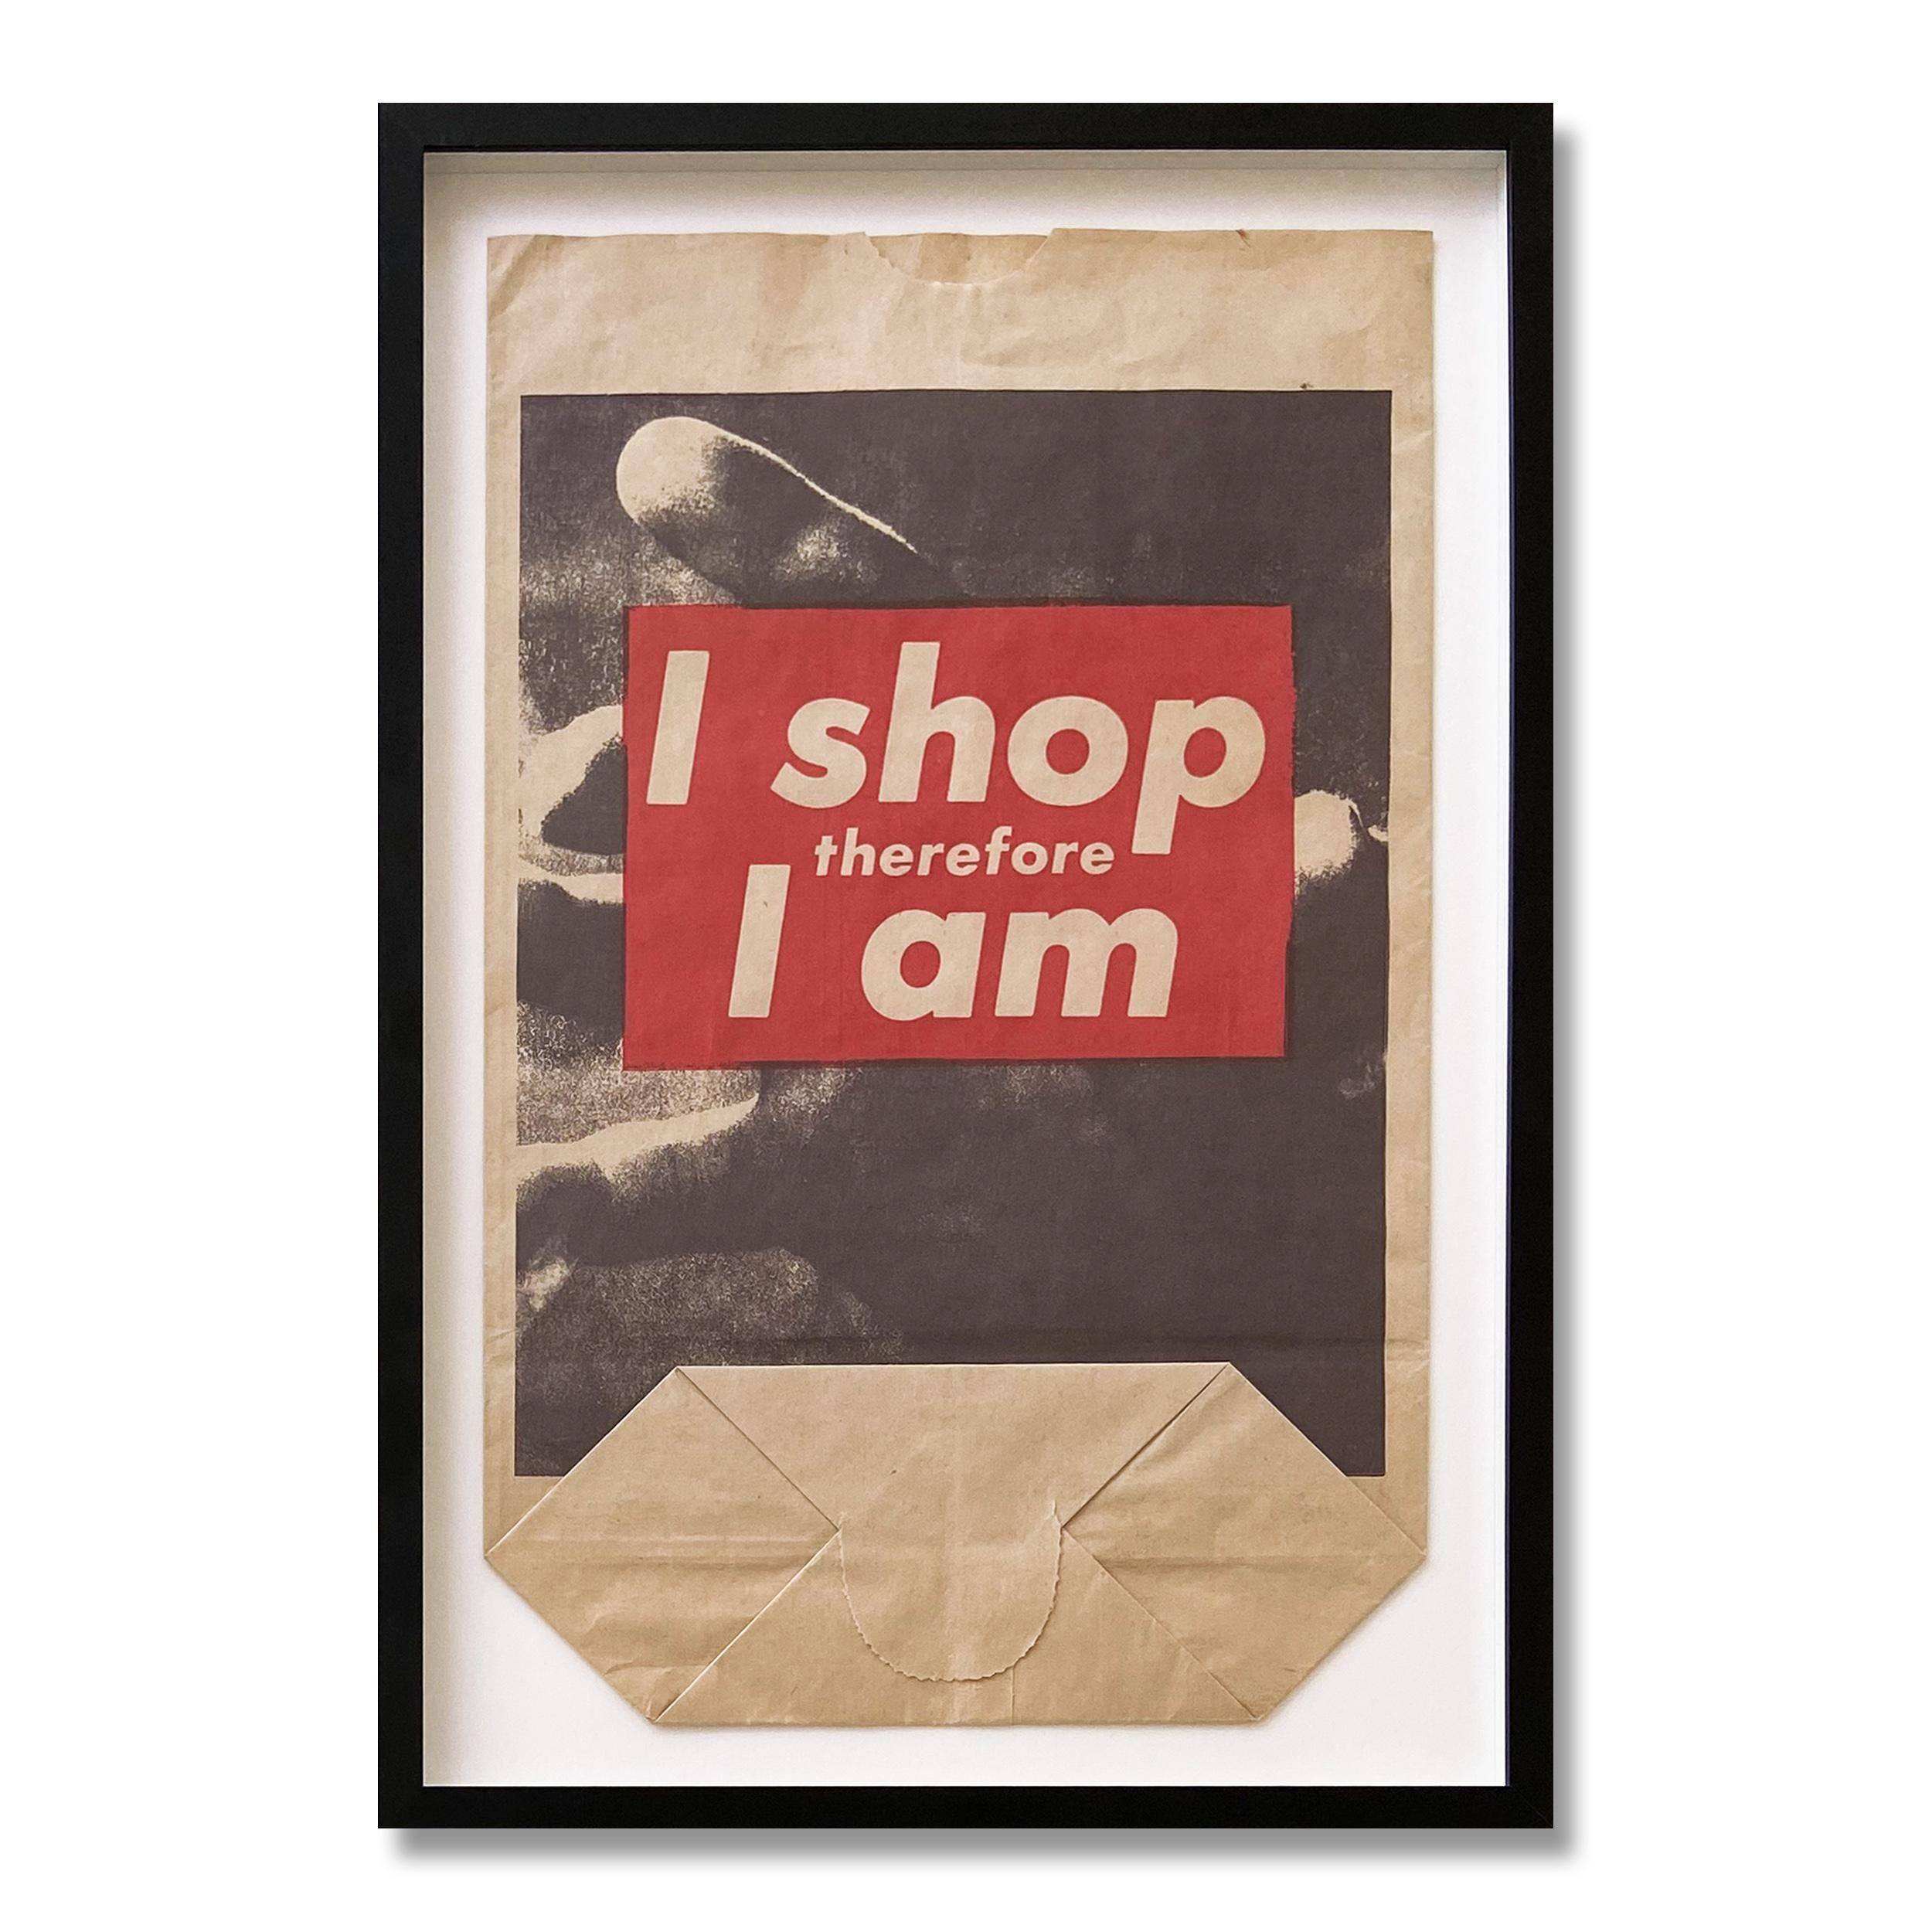 Barbara Kruger Abstract Print - I Shop Therefore I Am, Shopping Bag Multiple, 1990, Contemporary Art, Pop Art